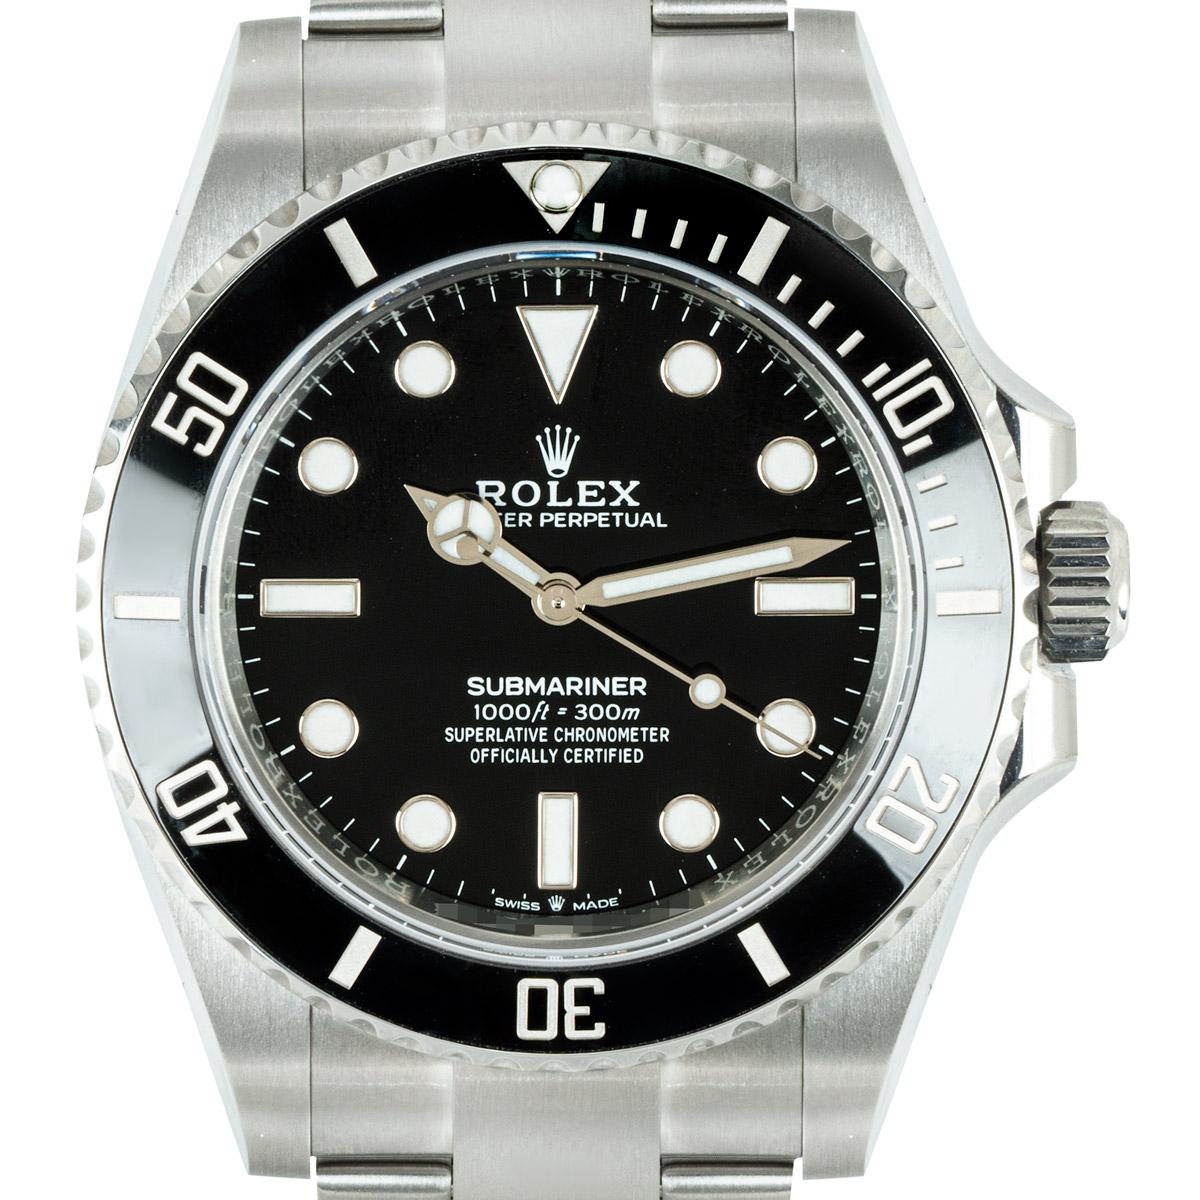 An unworn 41mm Submariner Non-Date, in Oystersteel by Rolex. Featuring a black dial and a black ceramic unidirectional rotatable bezel with 60-minute graduations coated in platinum.

The Oyster bracelet comes with the folding Oysterlock clasp which